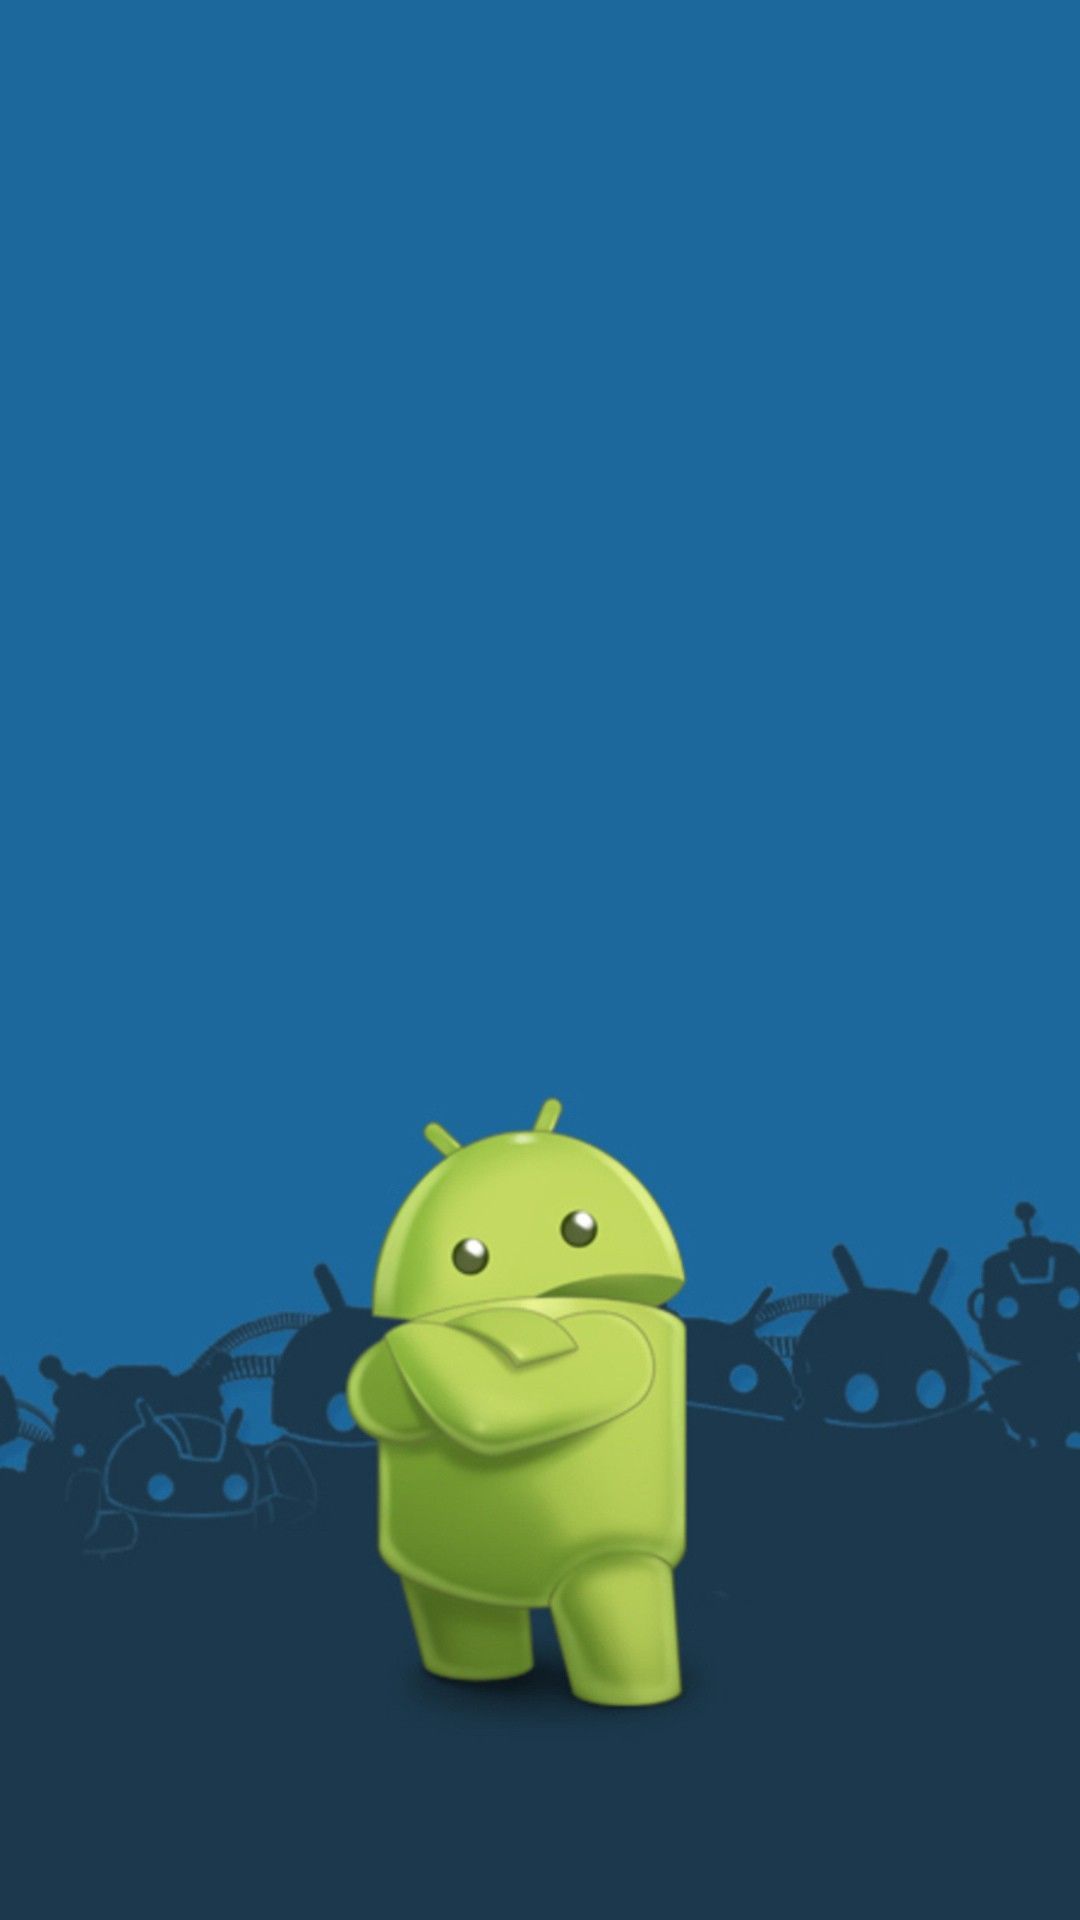 Cool Android Logo - Cool Android Logo Phone Wallpaper HD | Planners in 2019 | Pinterest ...